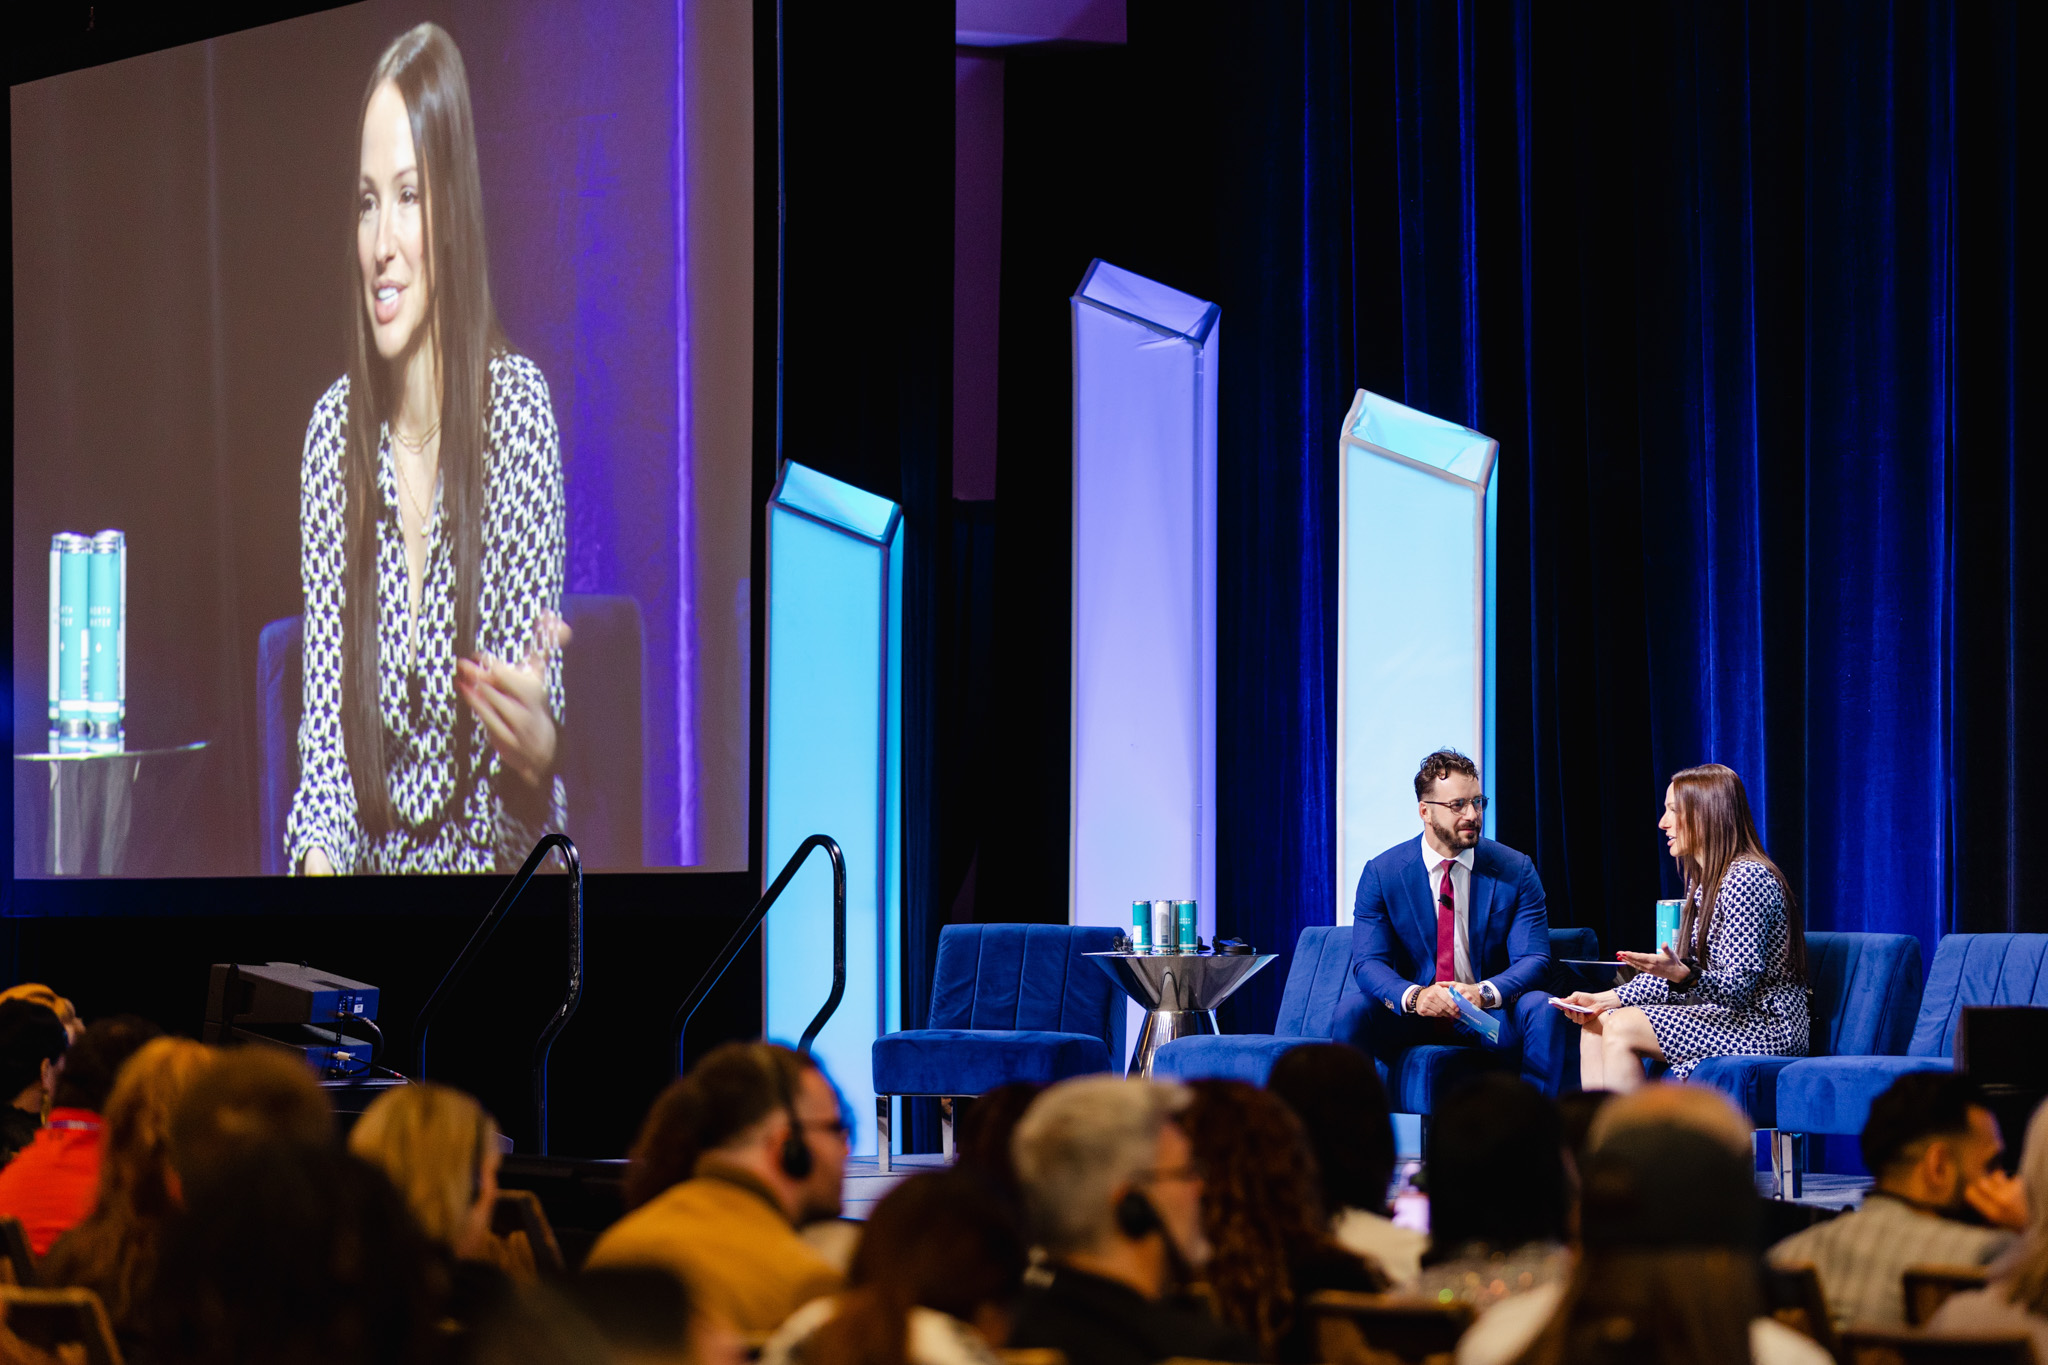 Two individuals are seated on a stage engaged in conversation during a conference, perfectly captured through corporate photography. A large screen prominently displays one of the speakers, while an attentive audience is visible in the foreground.